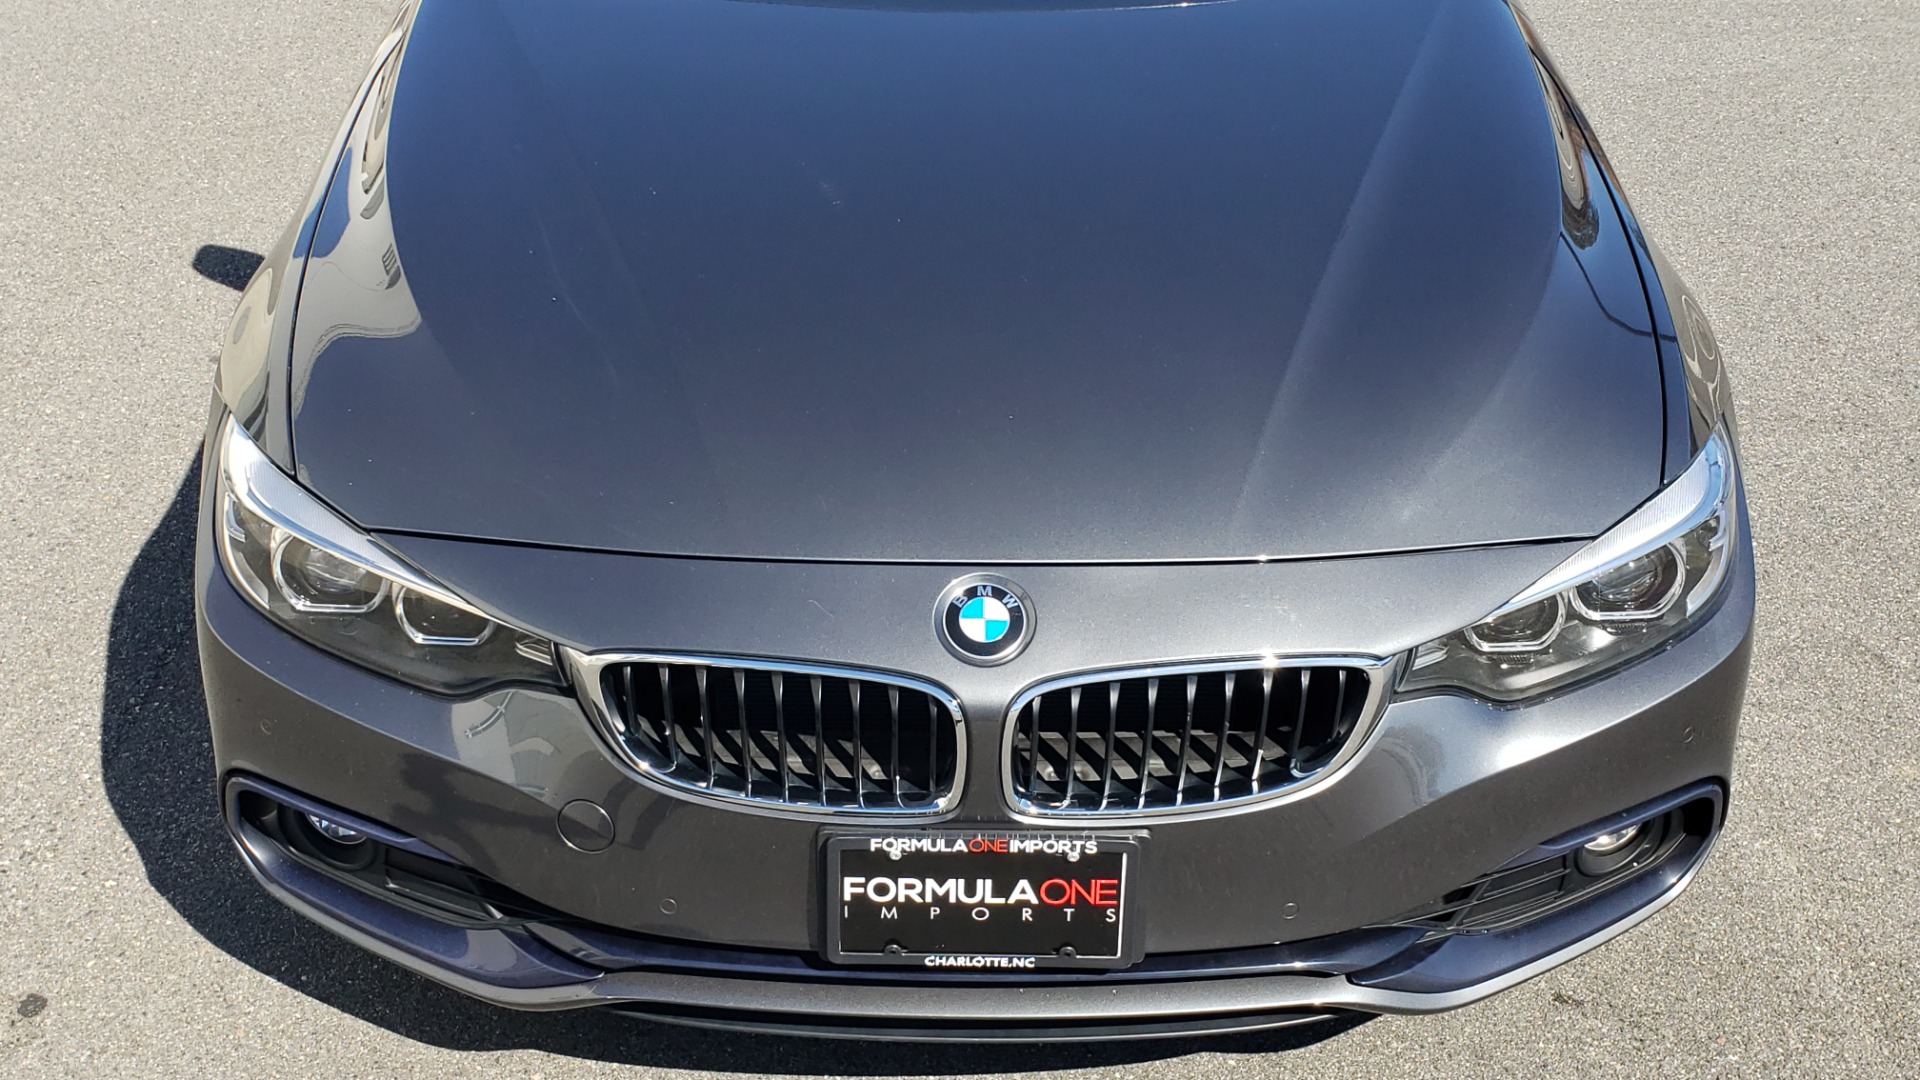 Used 2018 BMW 4 SERIES 430IXDRIVE / PREMIUM / NAV / SUNROOF / ESSENTIALS PKG for sale Sold at Formula Imports in Charlotte NC 28227 29